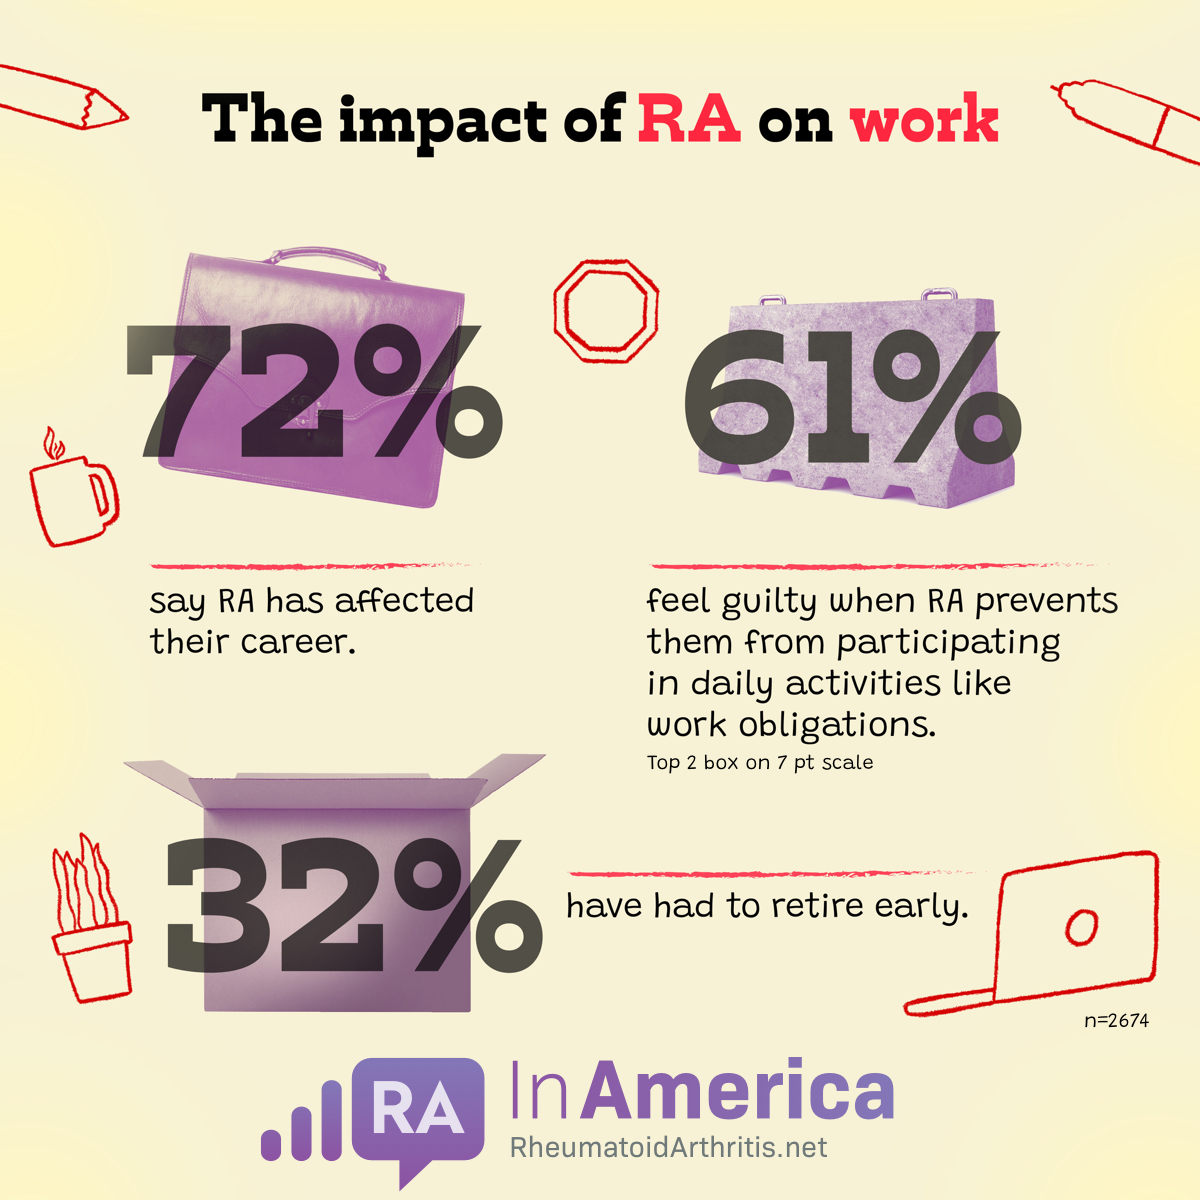 A suitcase, roadblock, and cardboard box represent the impact of RA on working habits, where 72% of survey respondents have been affected in their career, 61% feel guilt when it comes to not participating in work obligations, and 32% retired early.